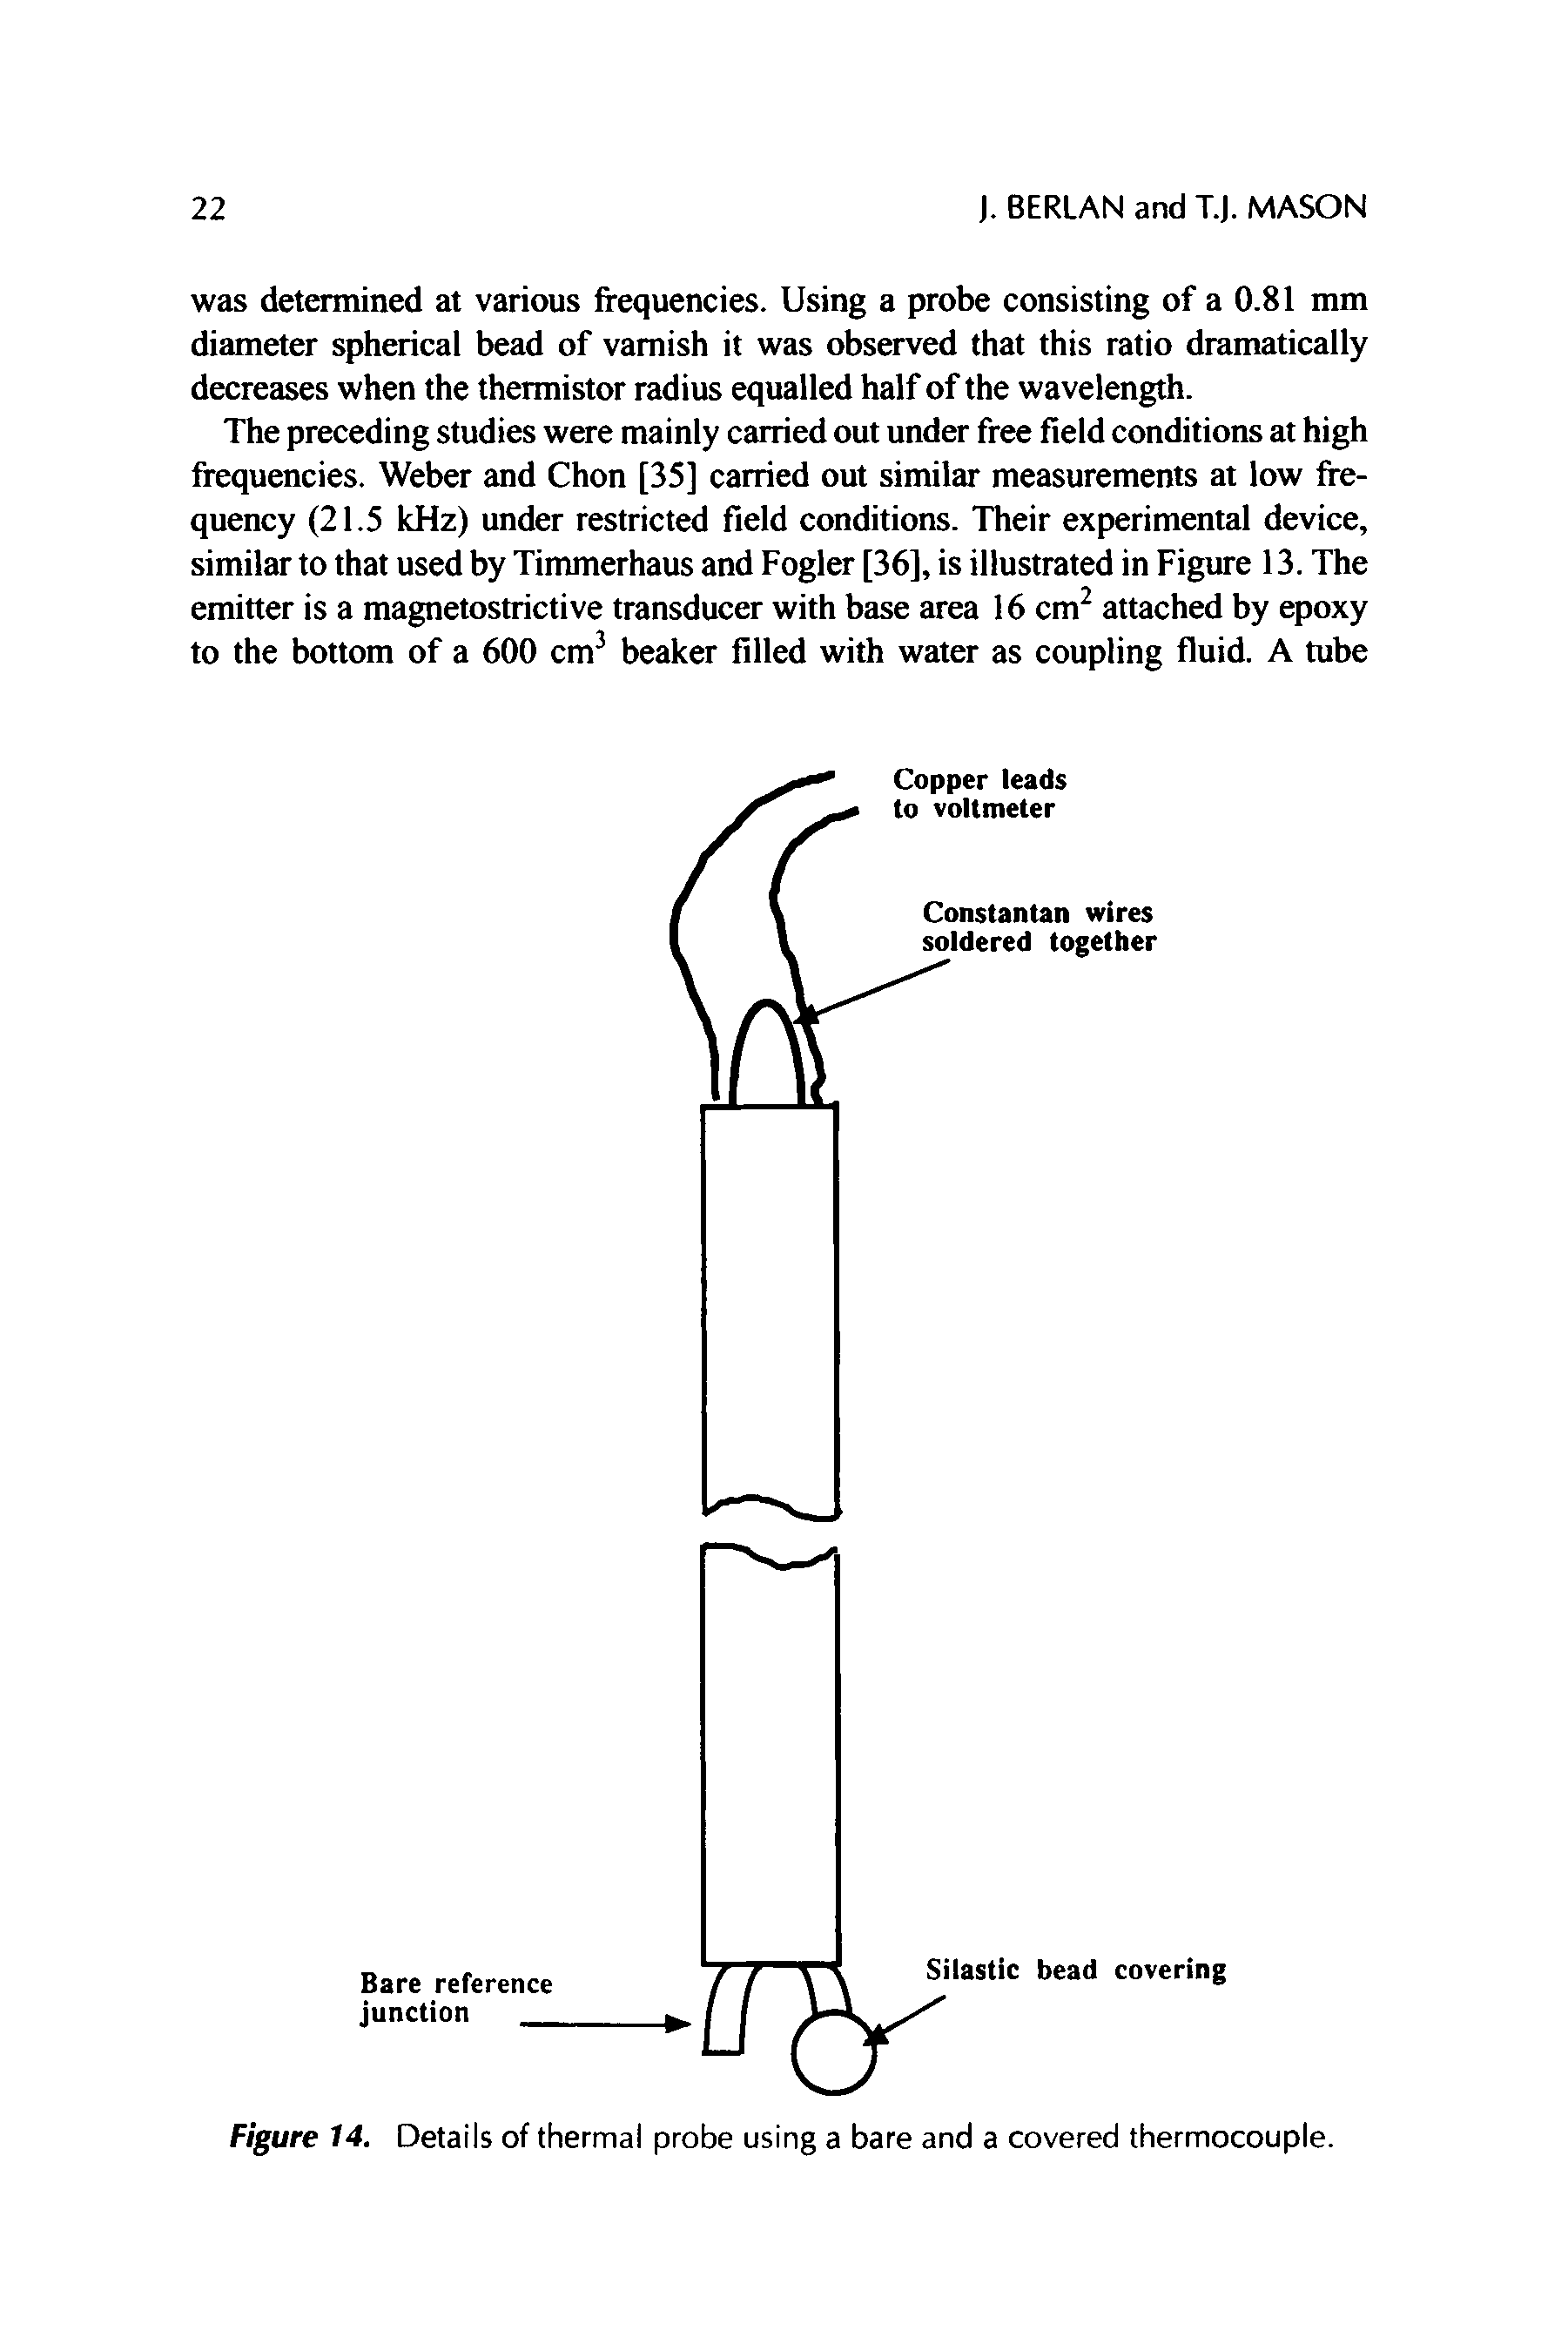 Figure 14. Details of thermal probe using a bare and a covered thermocouple.